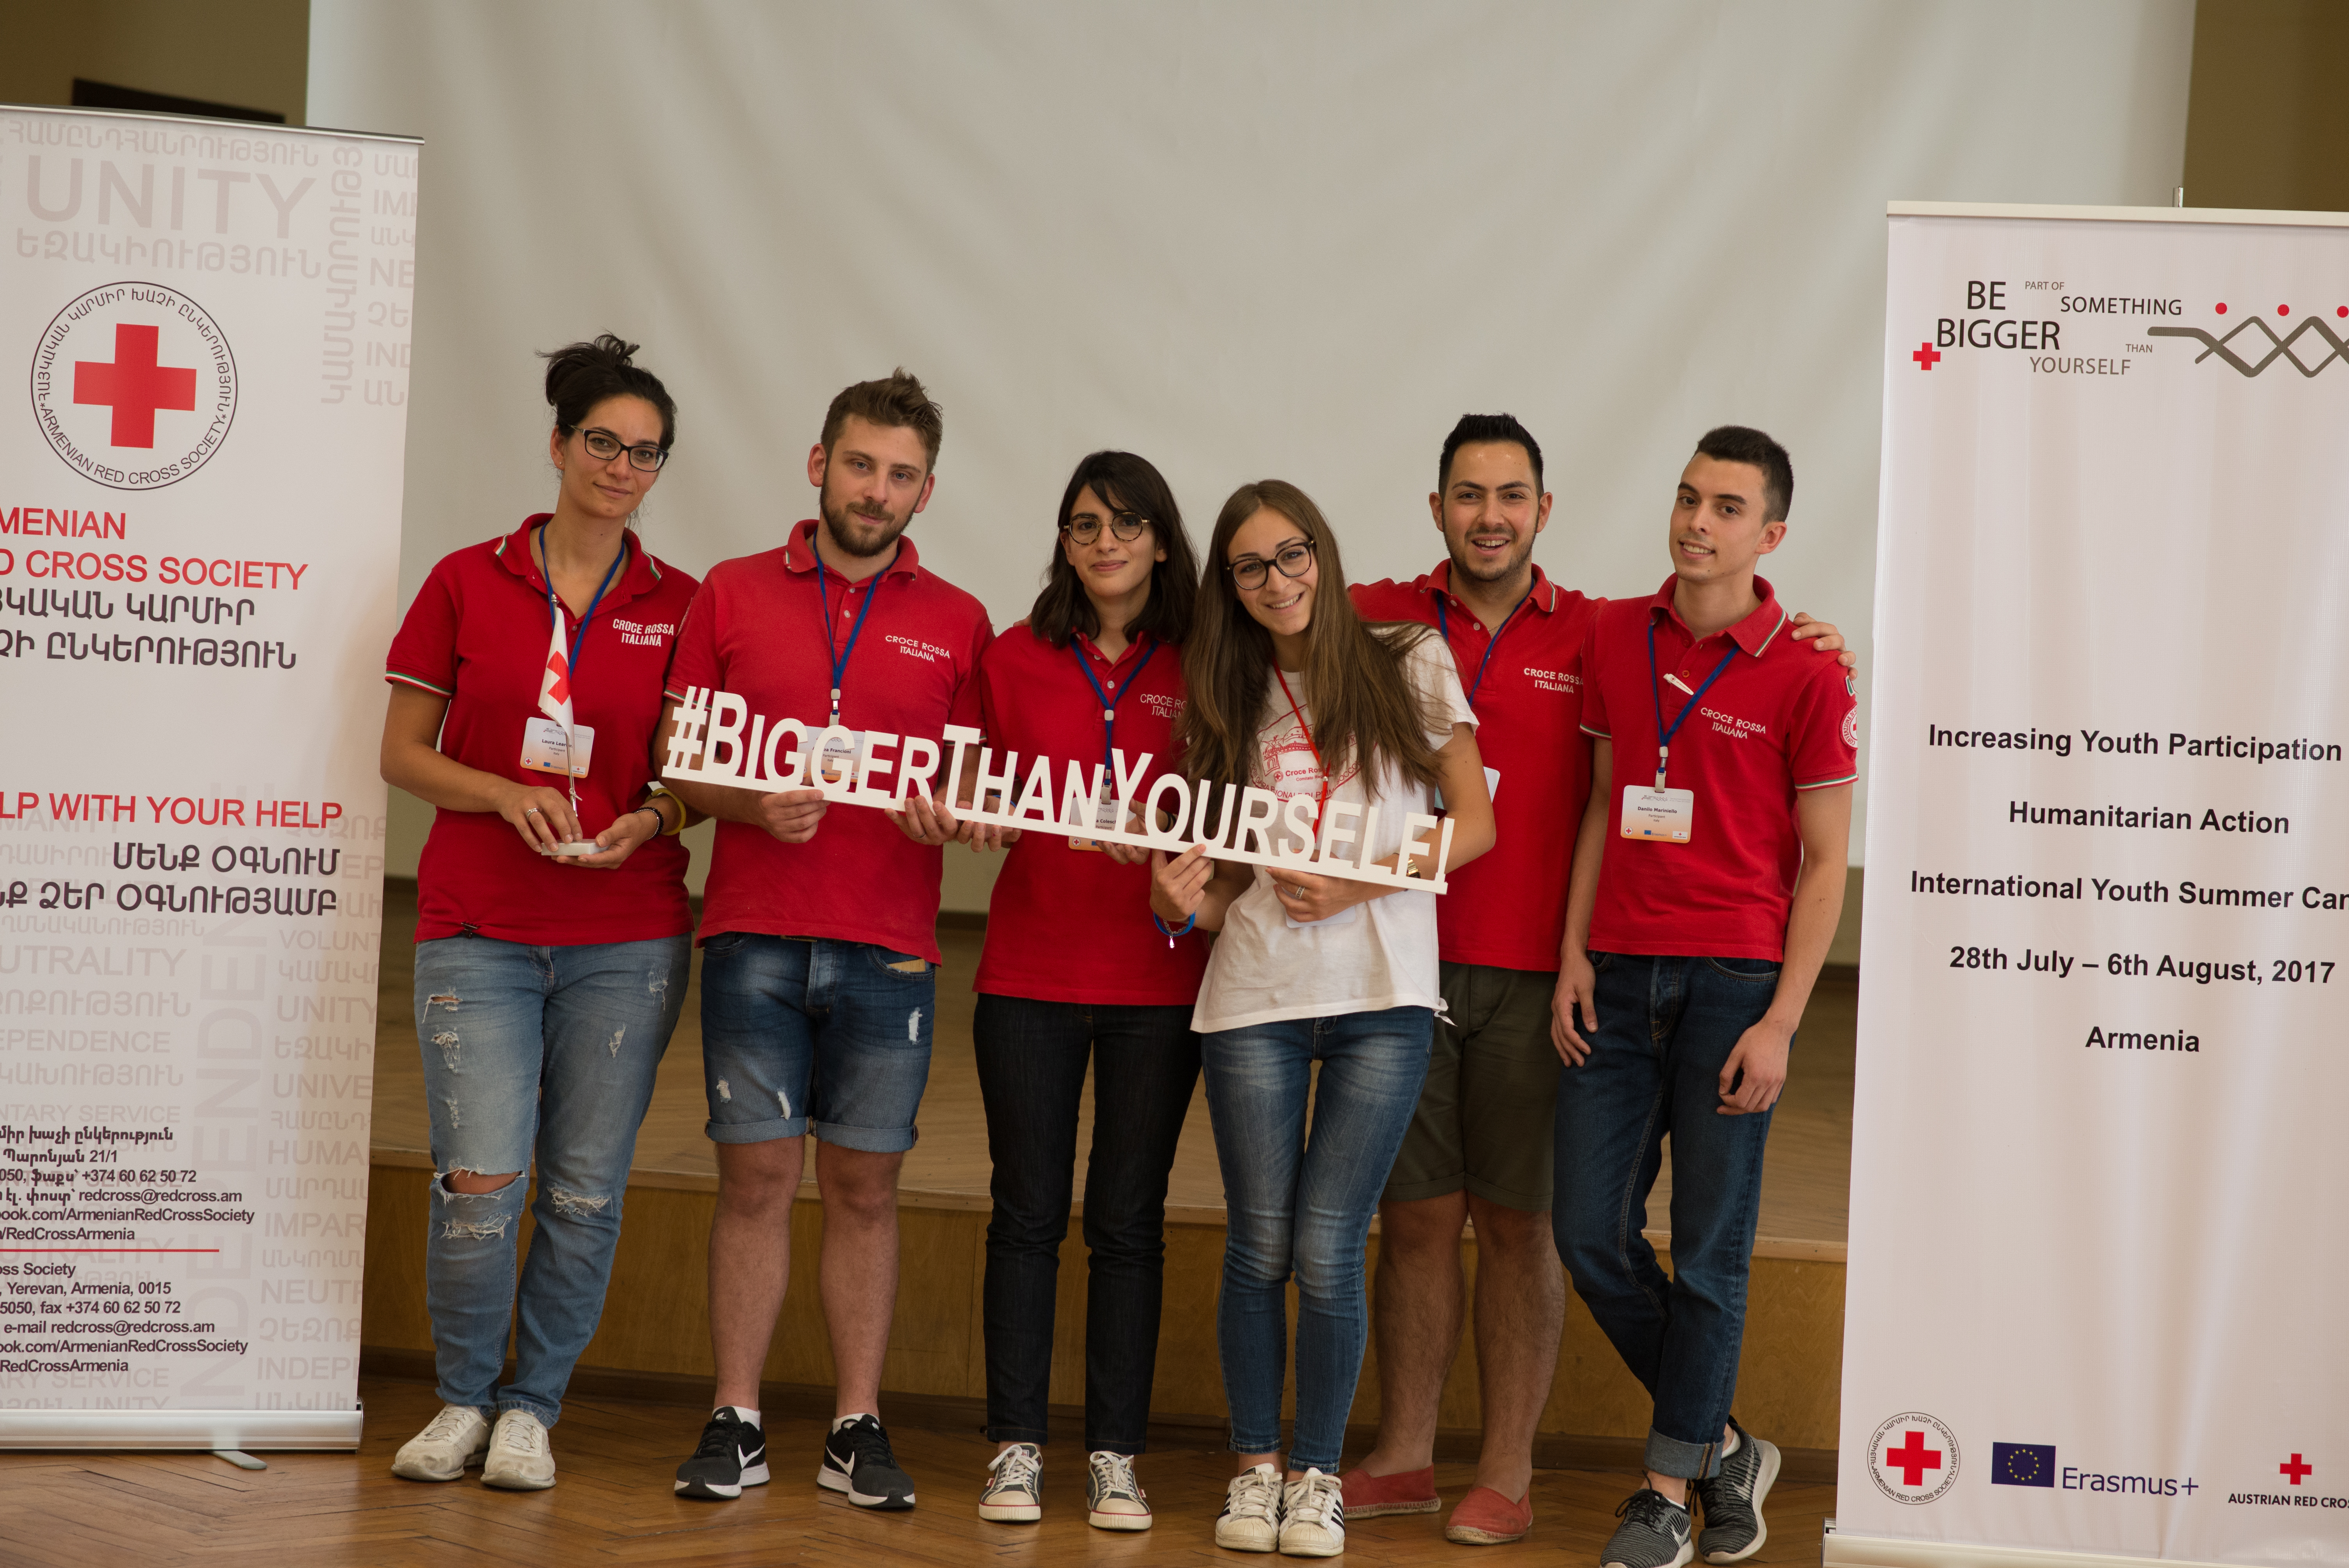 Delegazione italiana per “Be part of something bigger than yourself - Increasing Youth Participation in Humanitarian Action” in Armenia